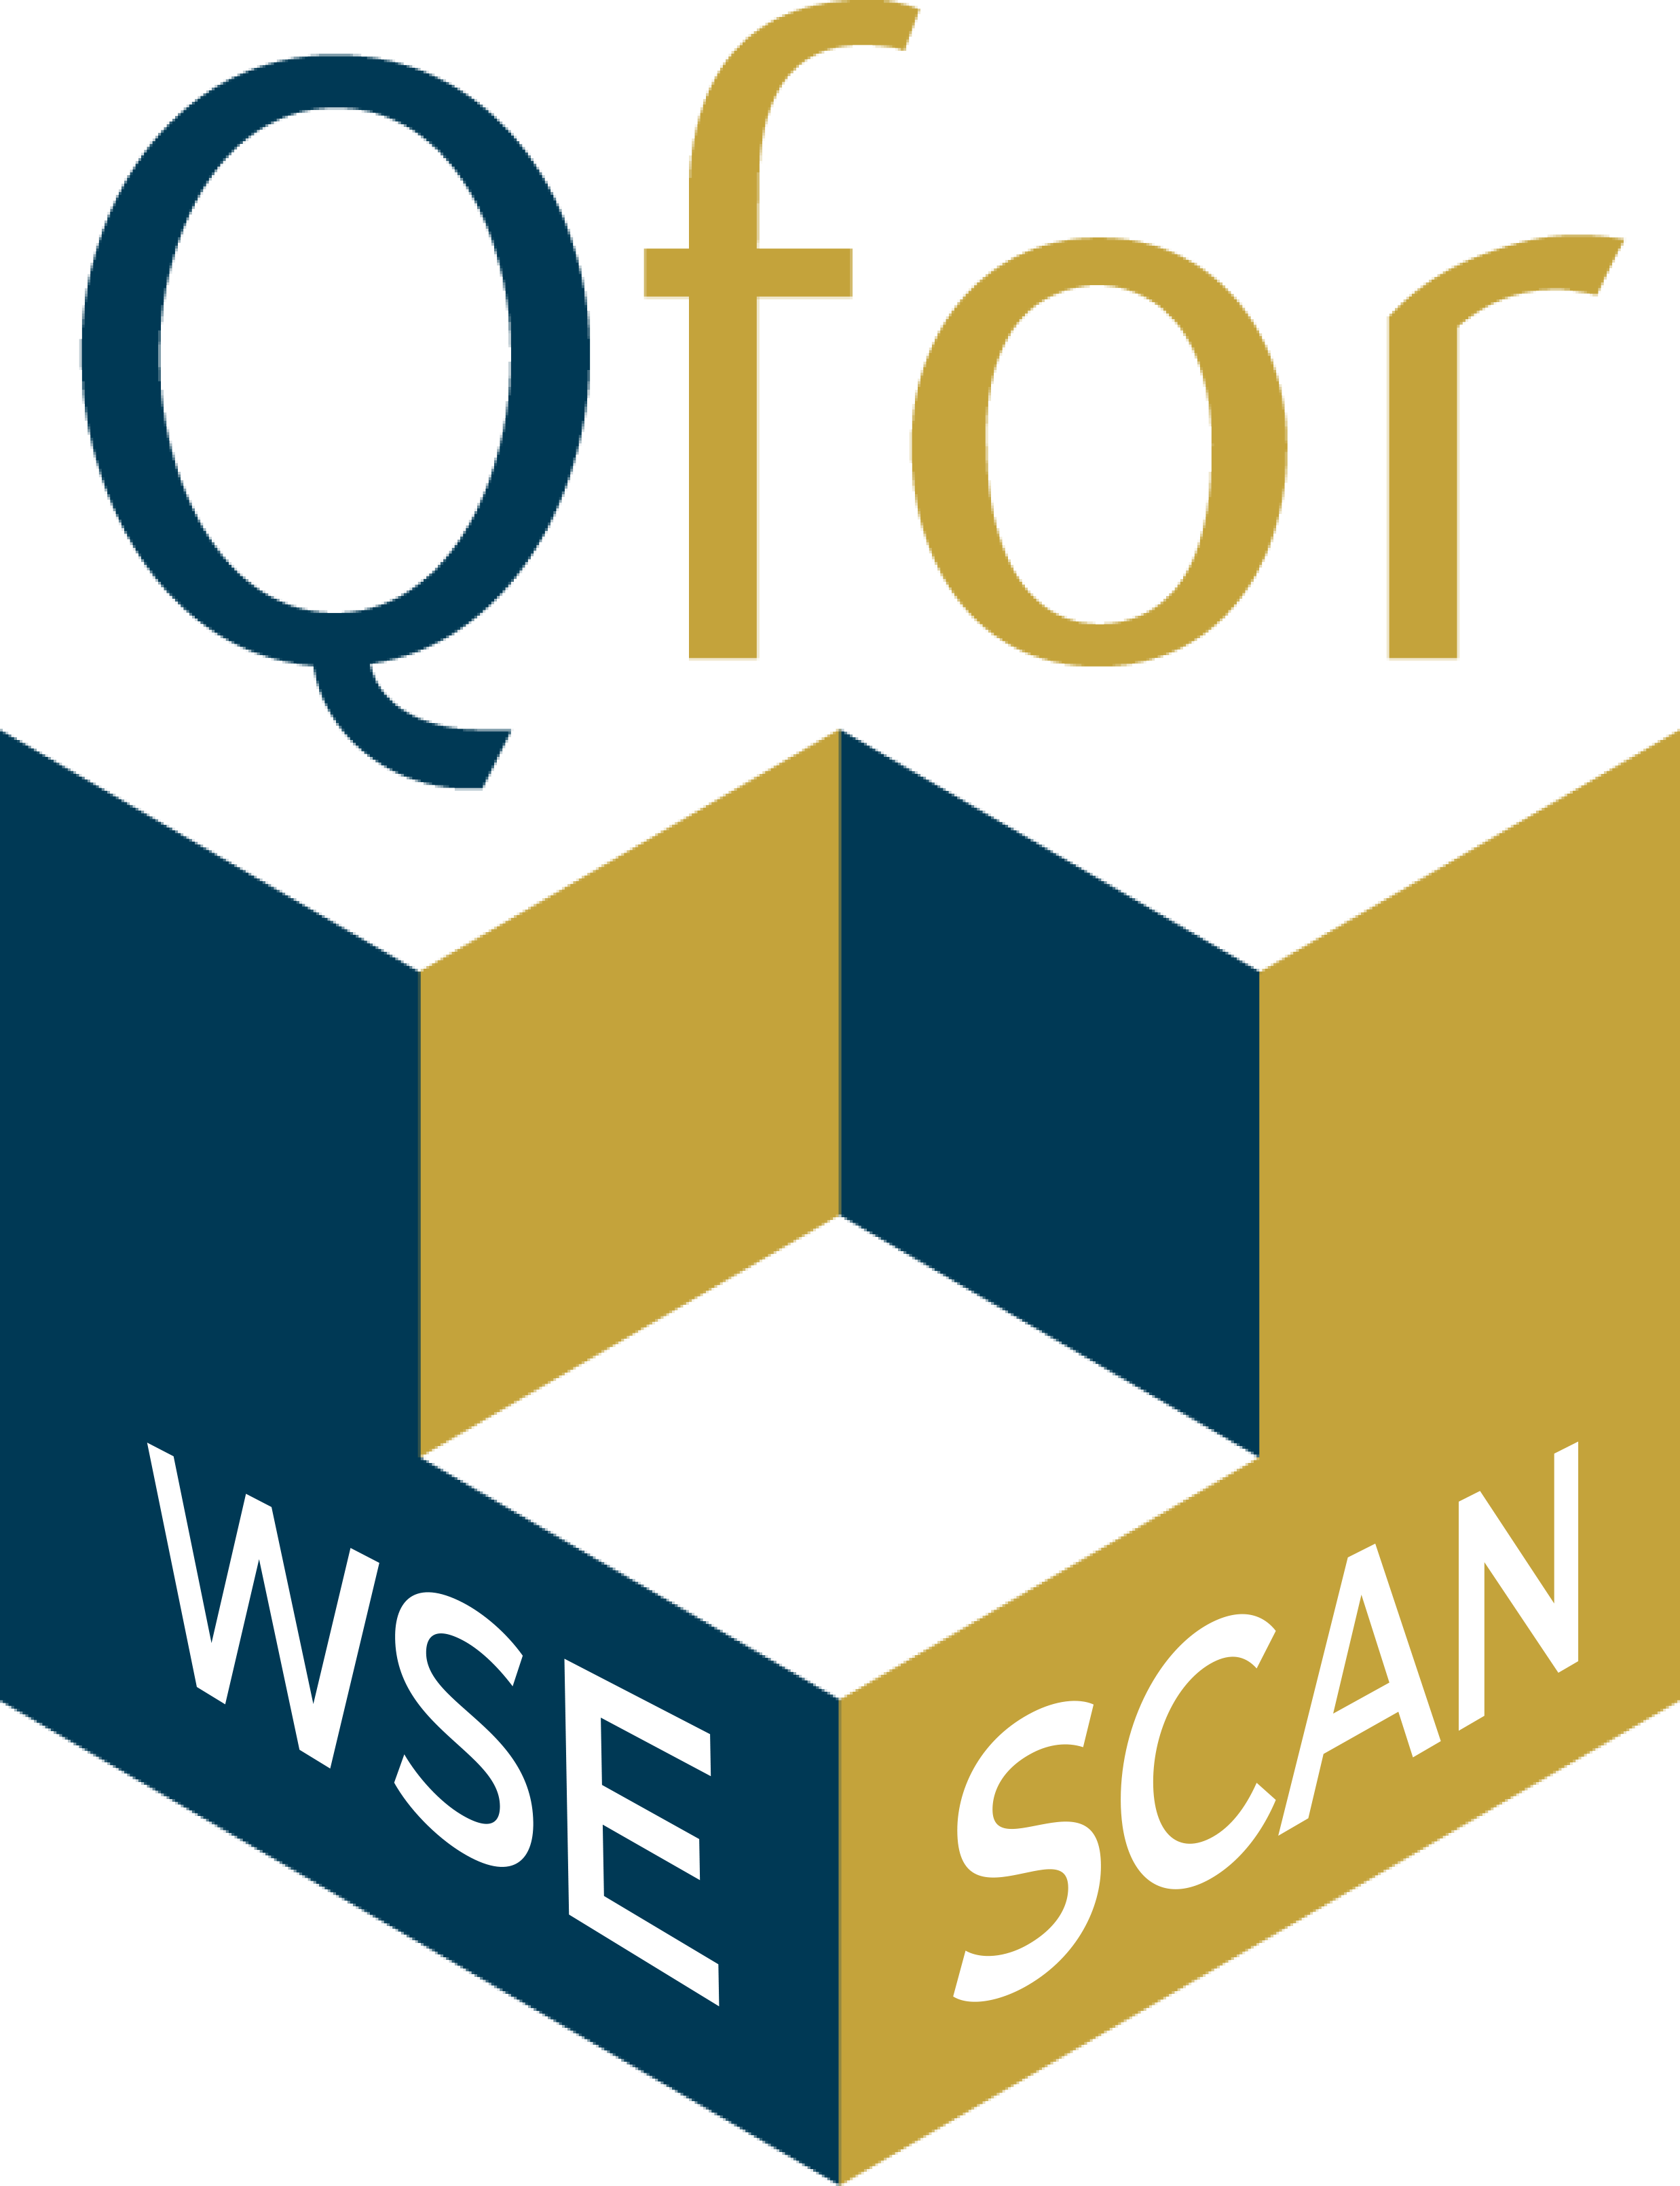 Qfor wse scan perspective